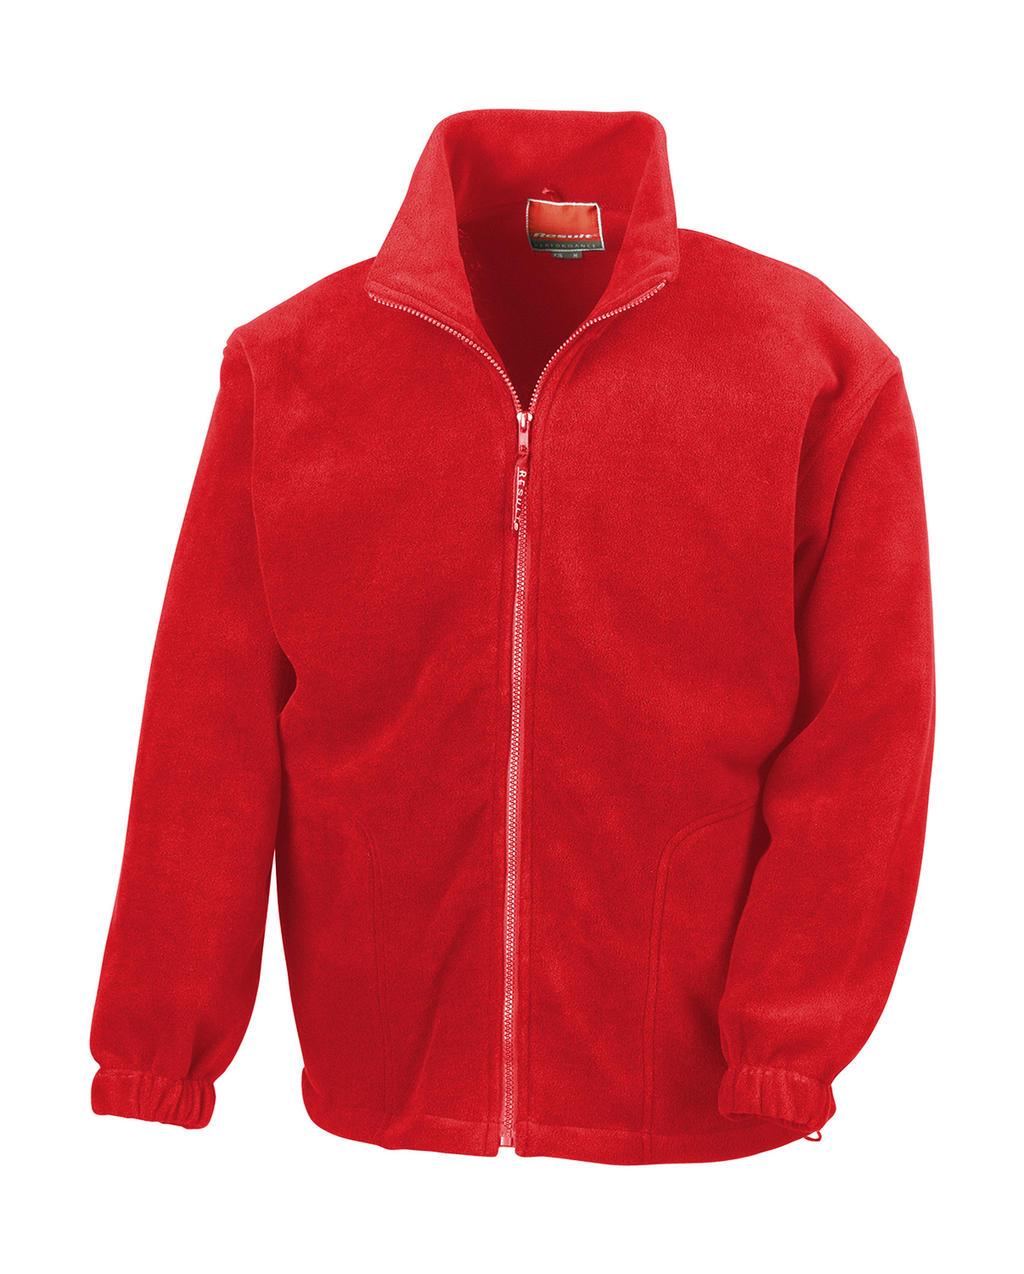  Polartherm? Jacket in Farbe Red